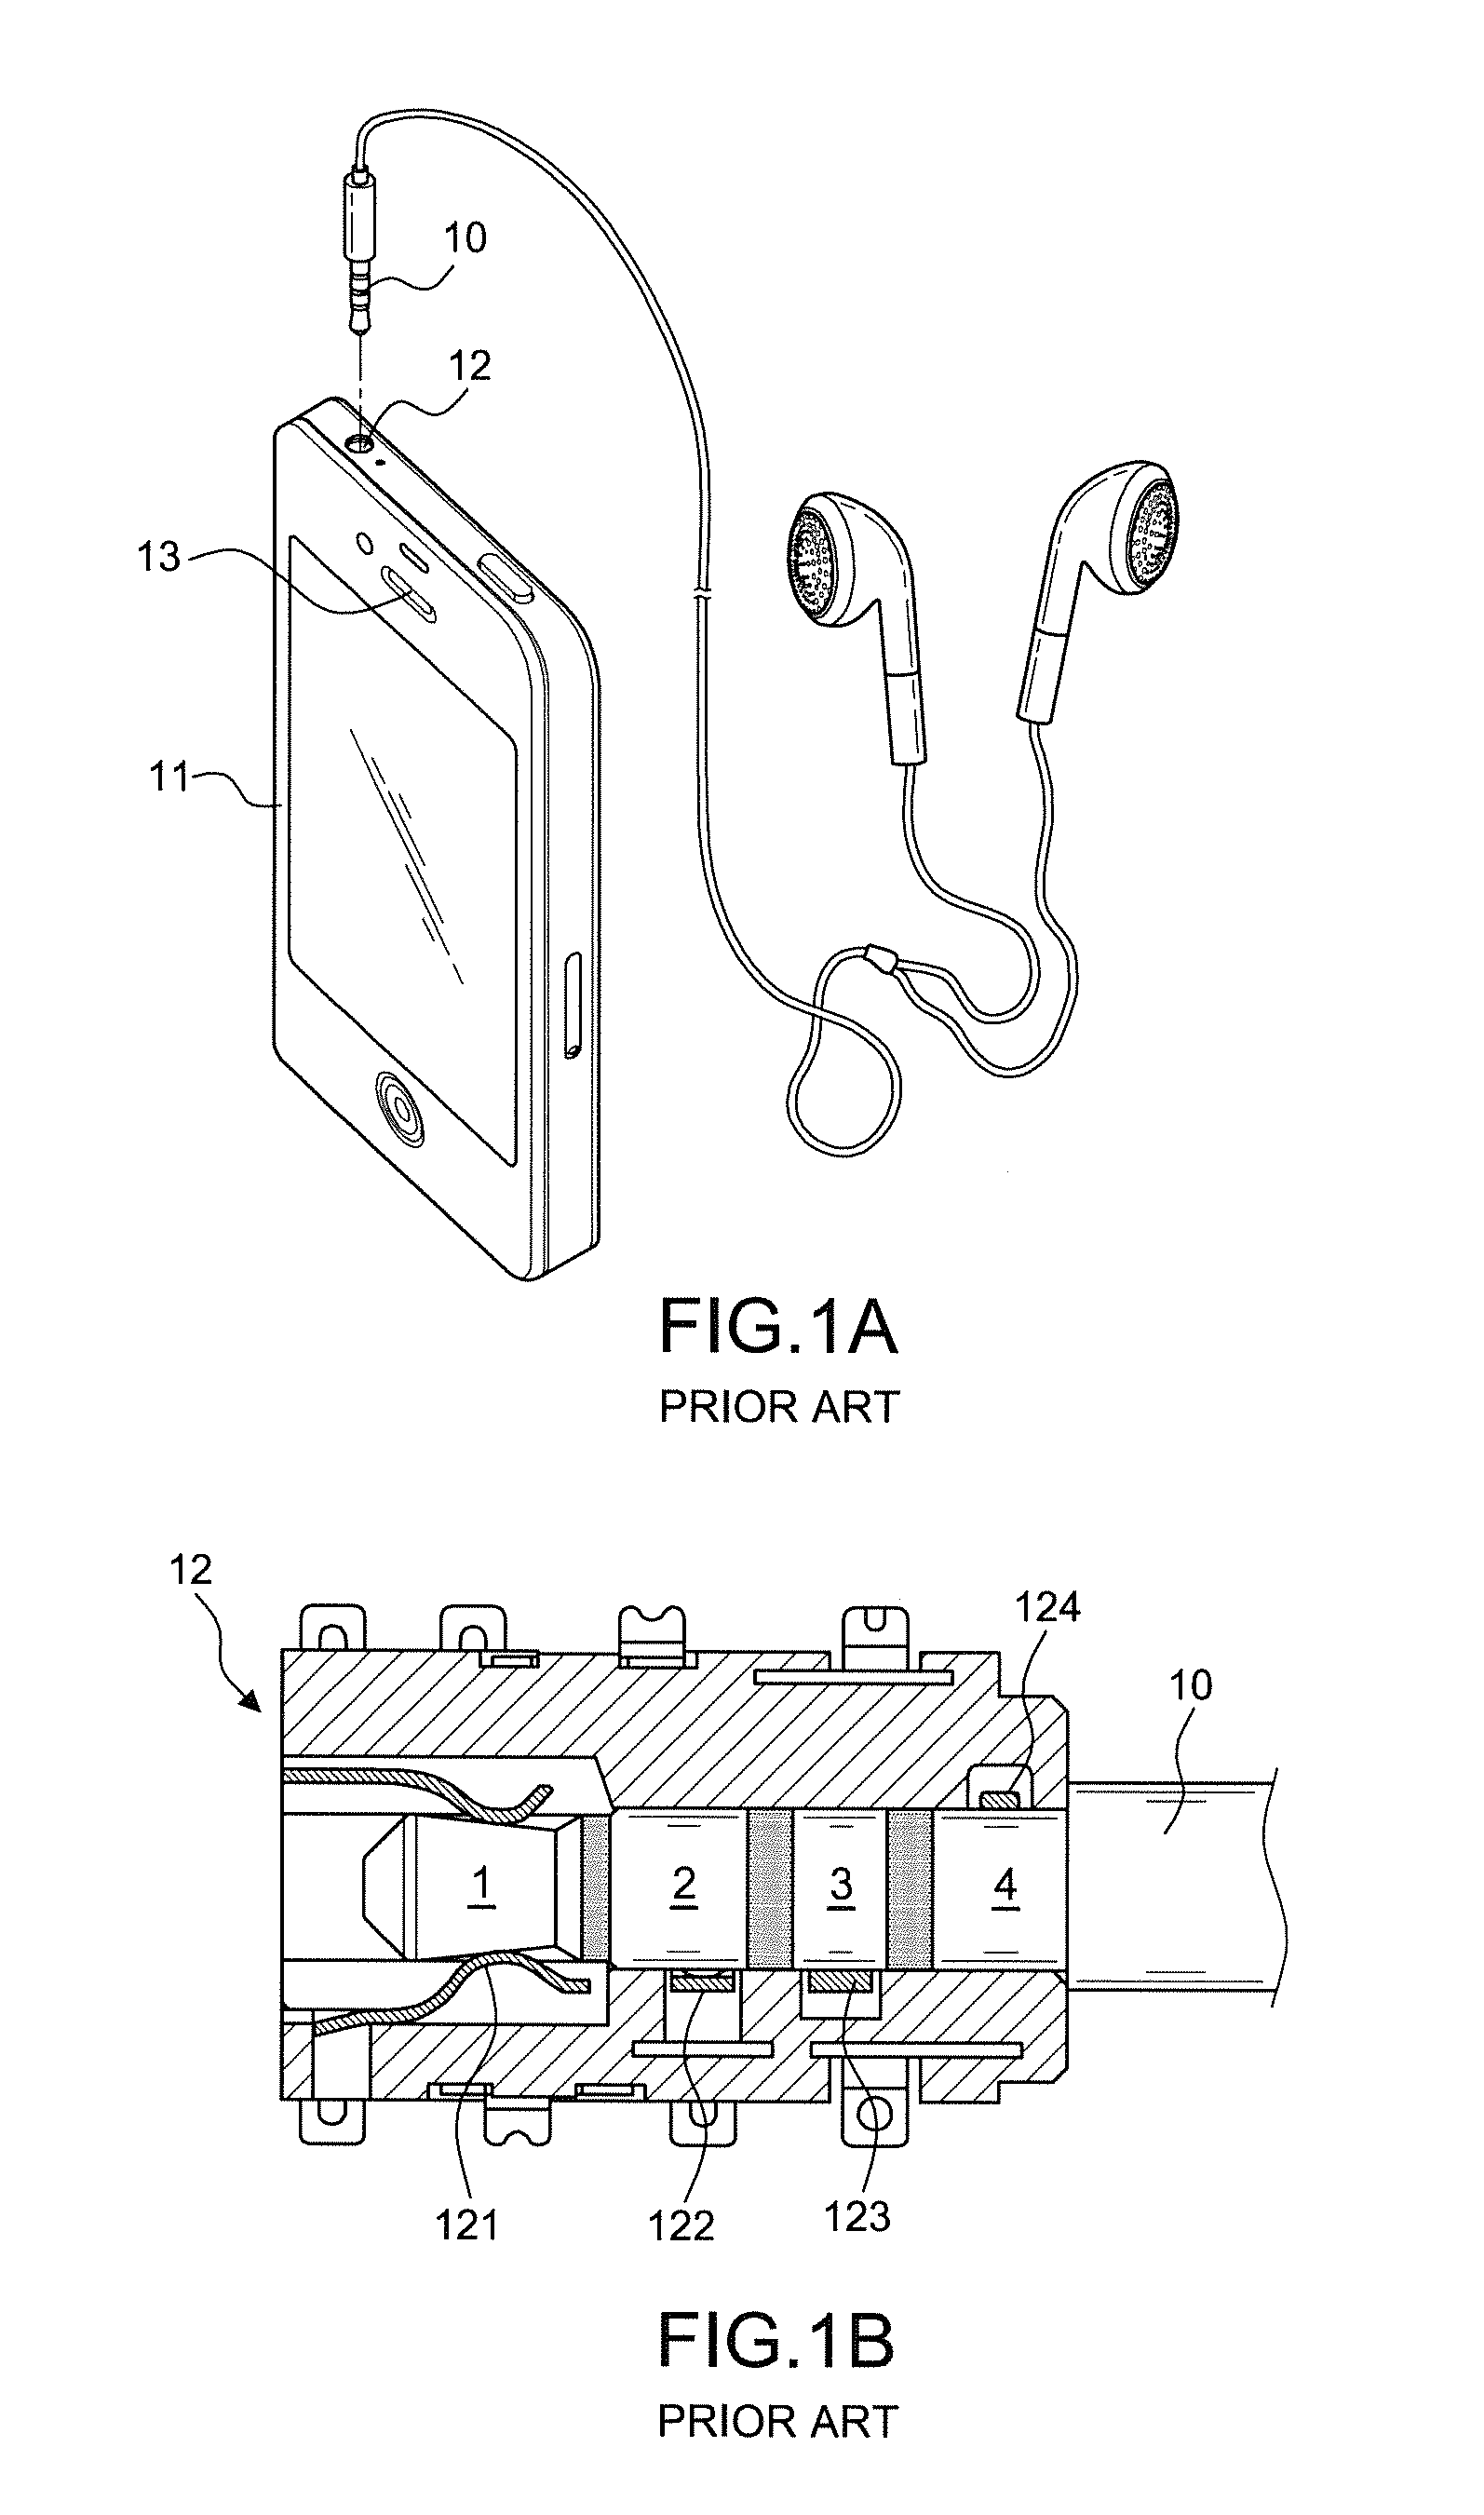 Audio plug structure having an electronic element with electrodes